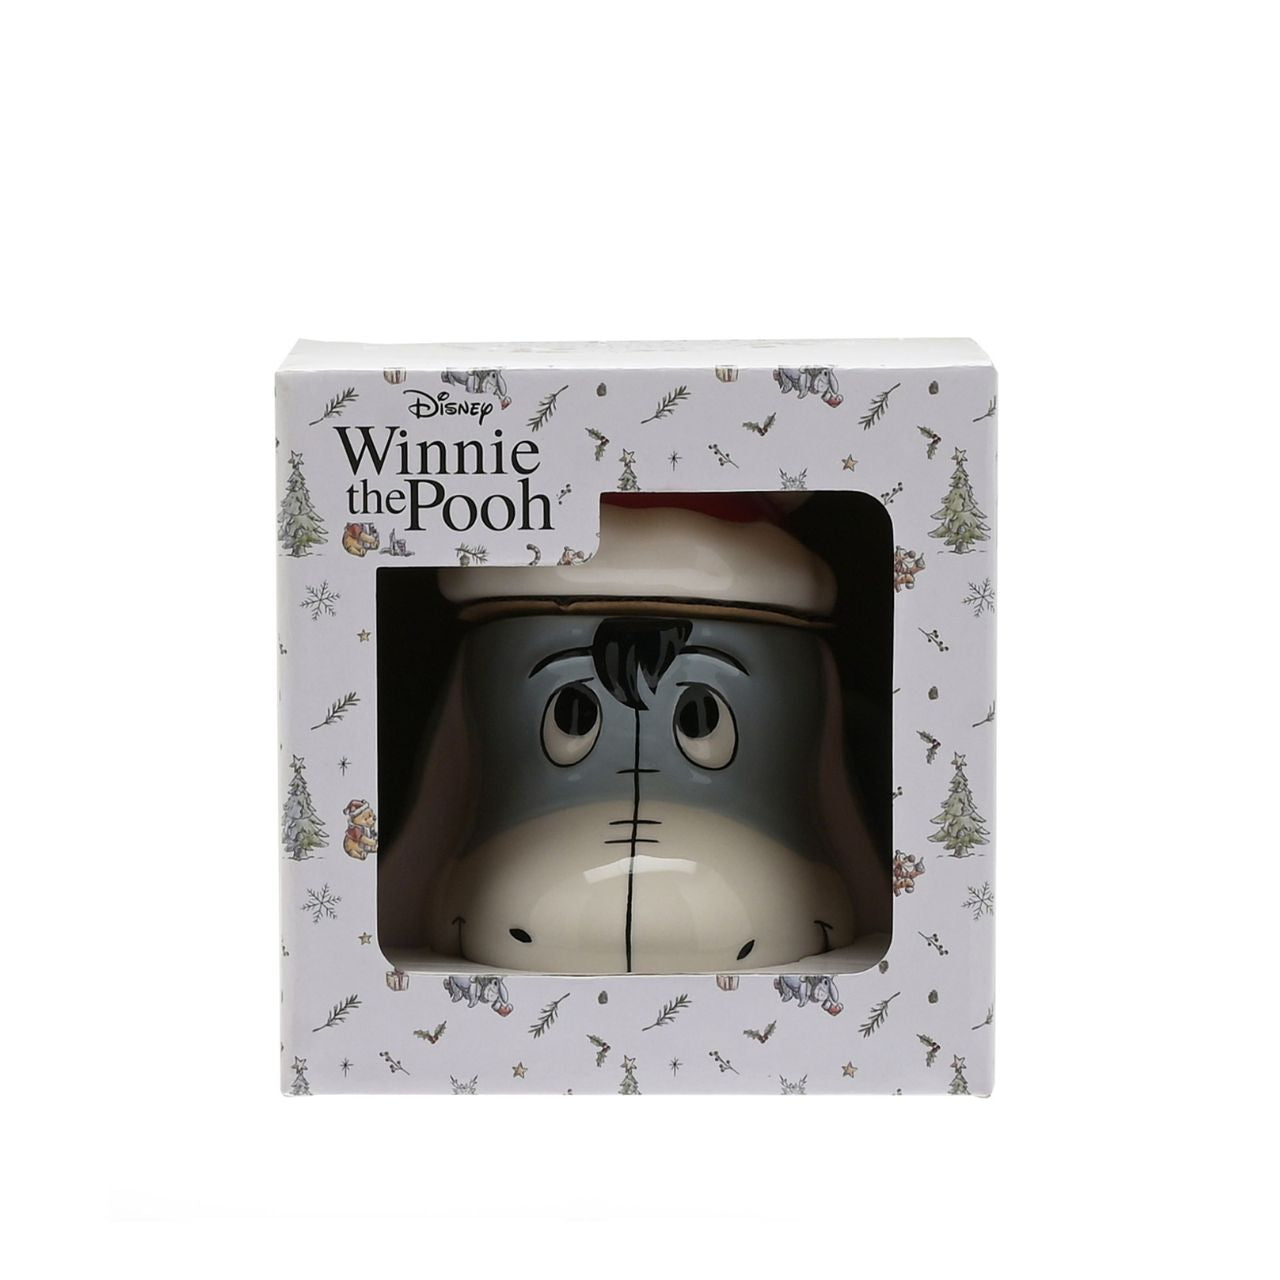 Disney Eeyore 3D Relief Christmas Mug  The cutest way to keep your hot drinks warm during the cold seasons, this lidded Christmas Eeyore mug would make a fun and festive addition to any home this Christmas.